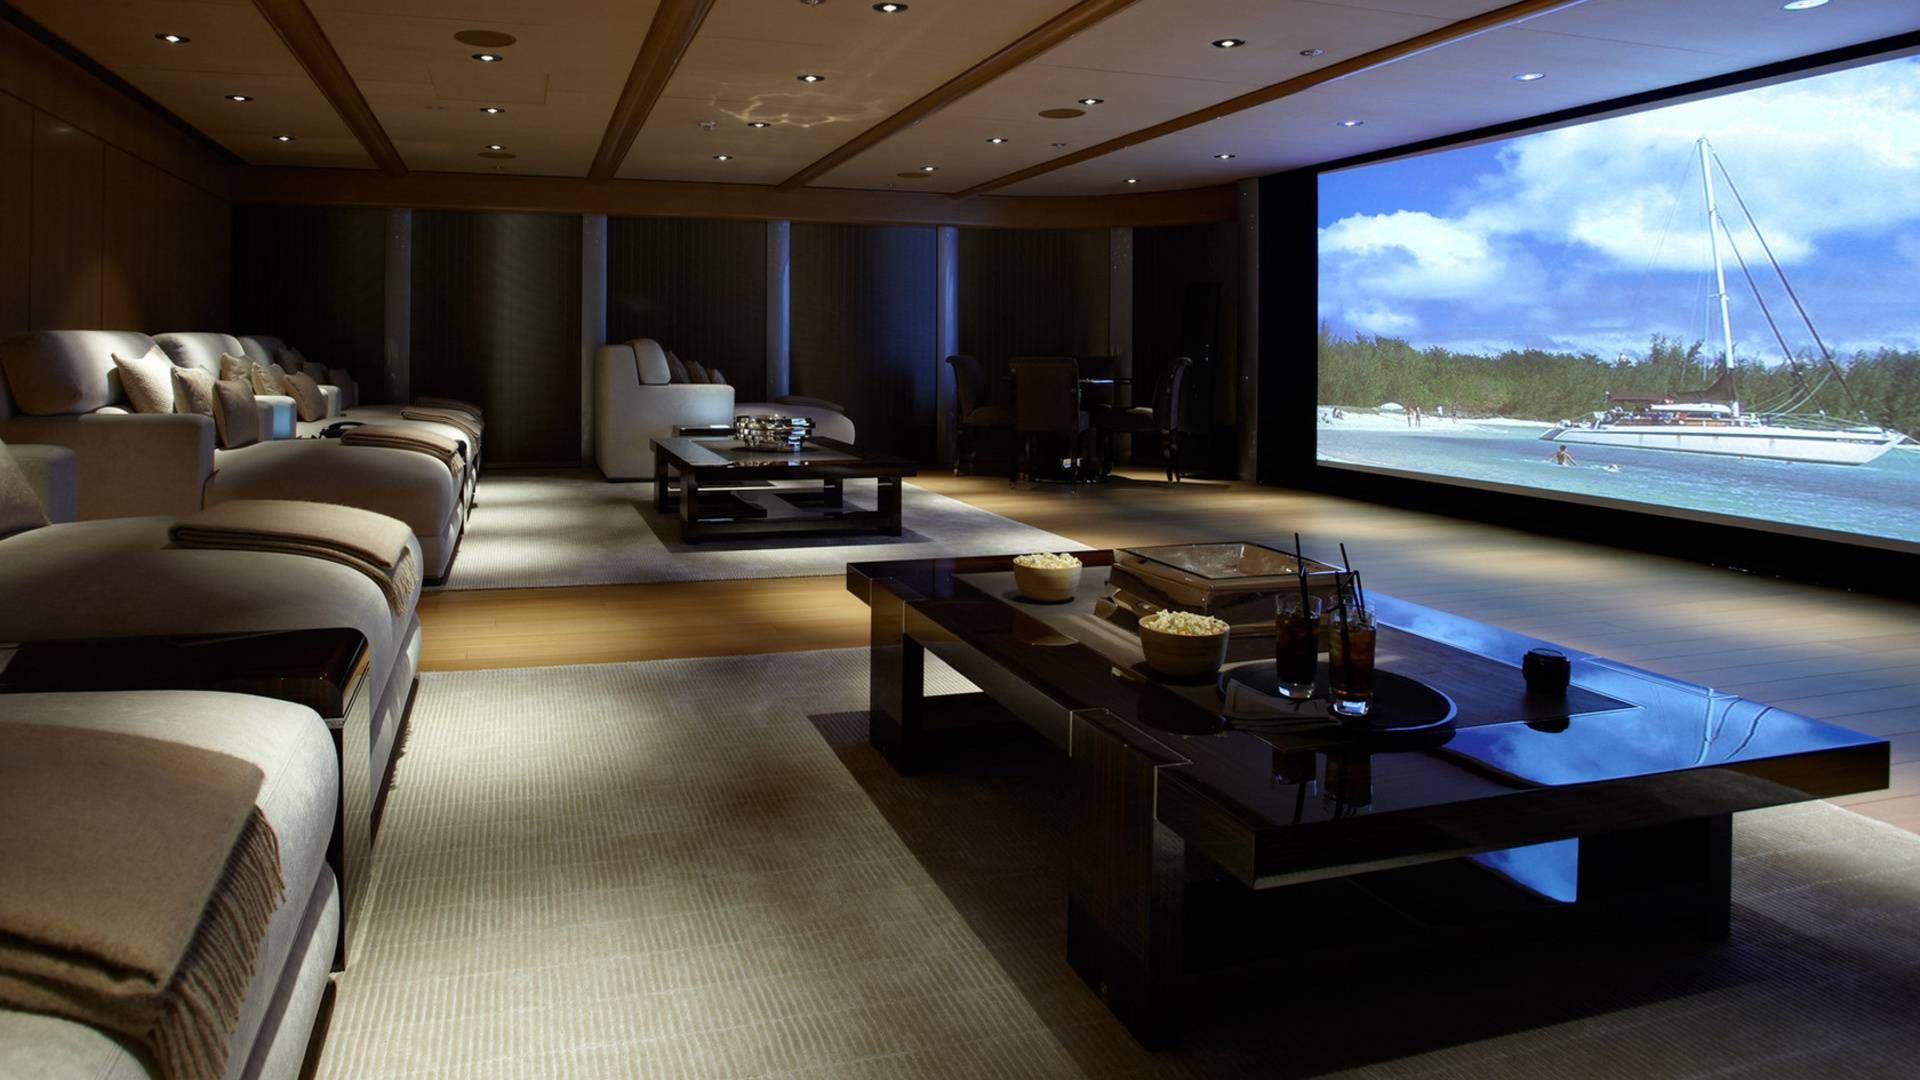 Furniture & Sofa: Enjoy Your Holiday With Costco Home Theater Pertaining To Theater Room Sofas (View 12 of 30)